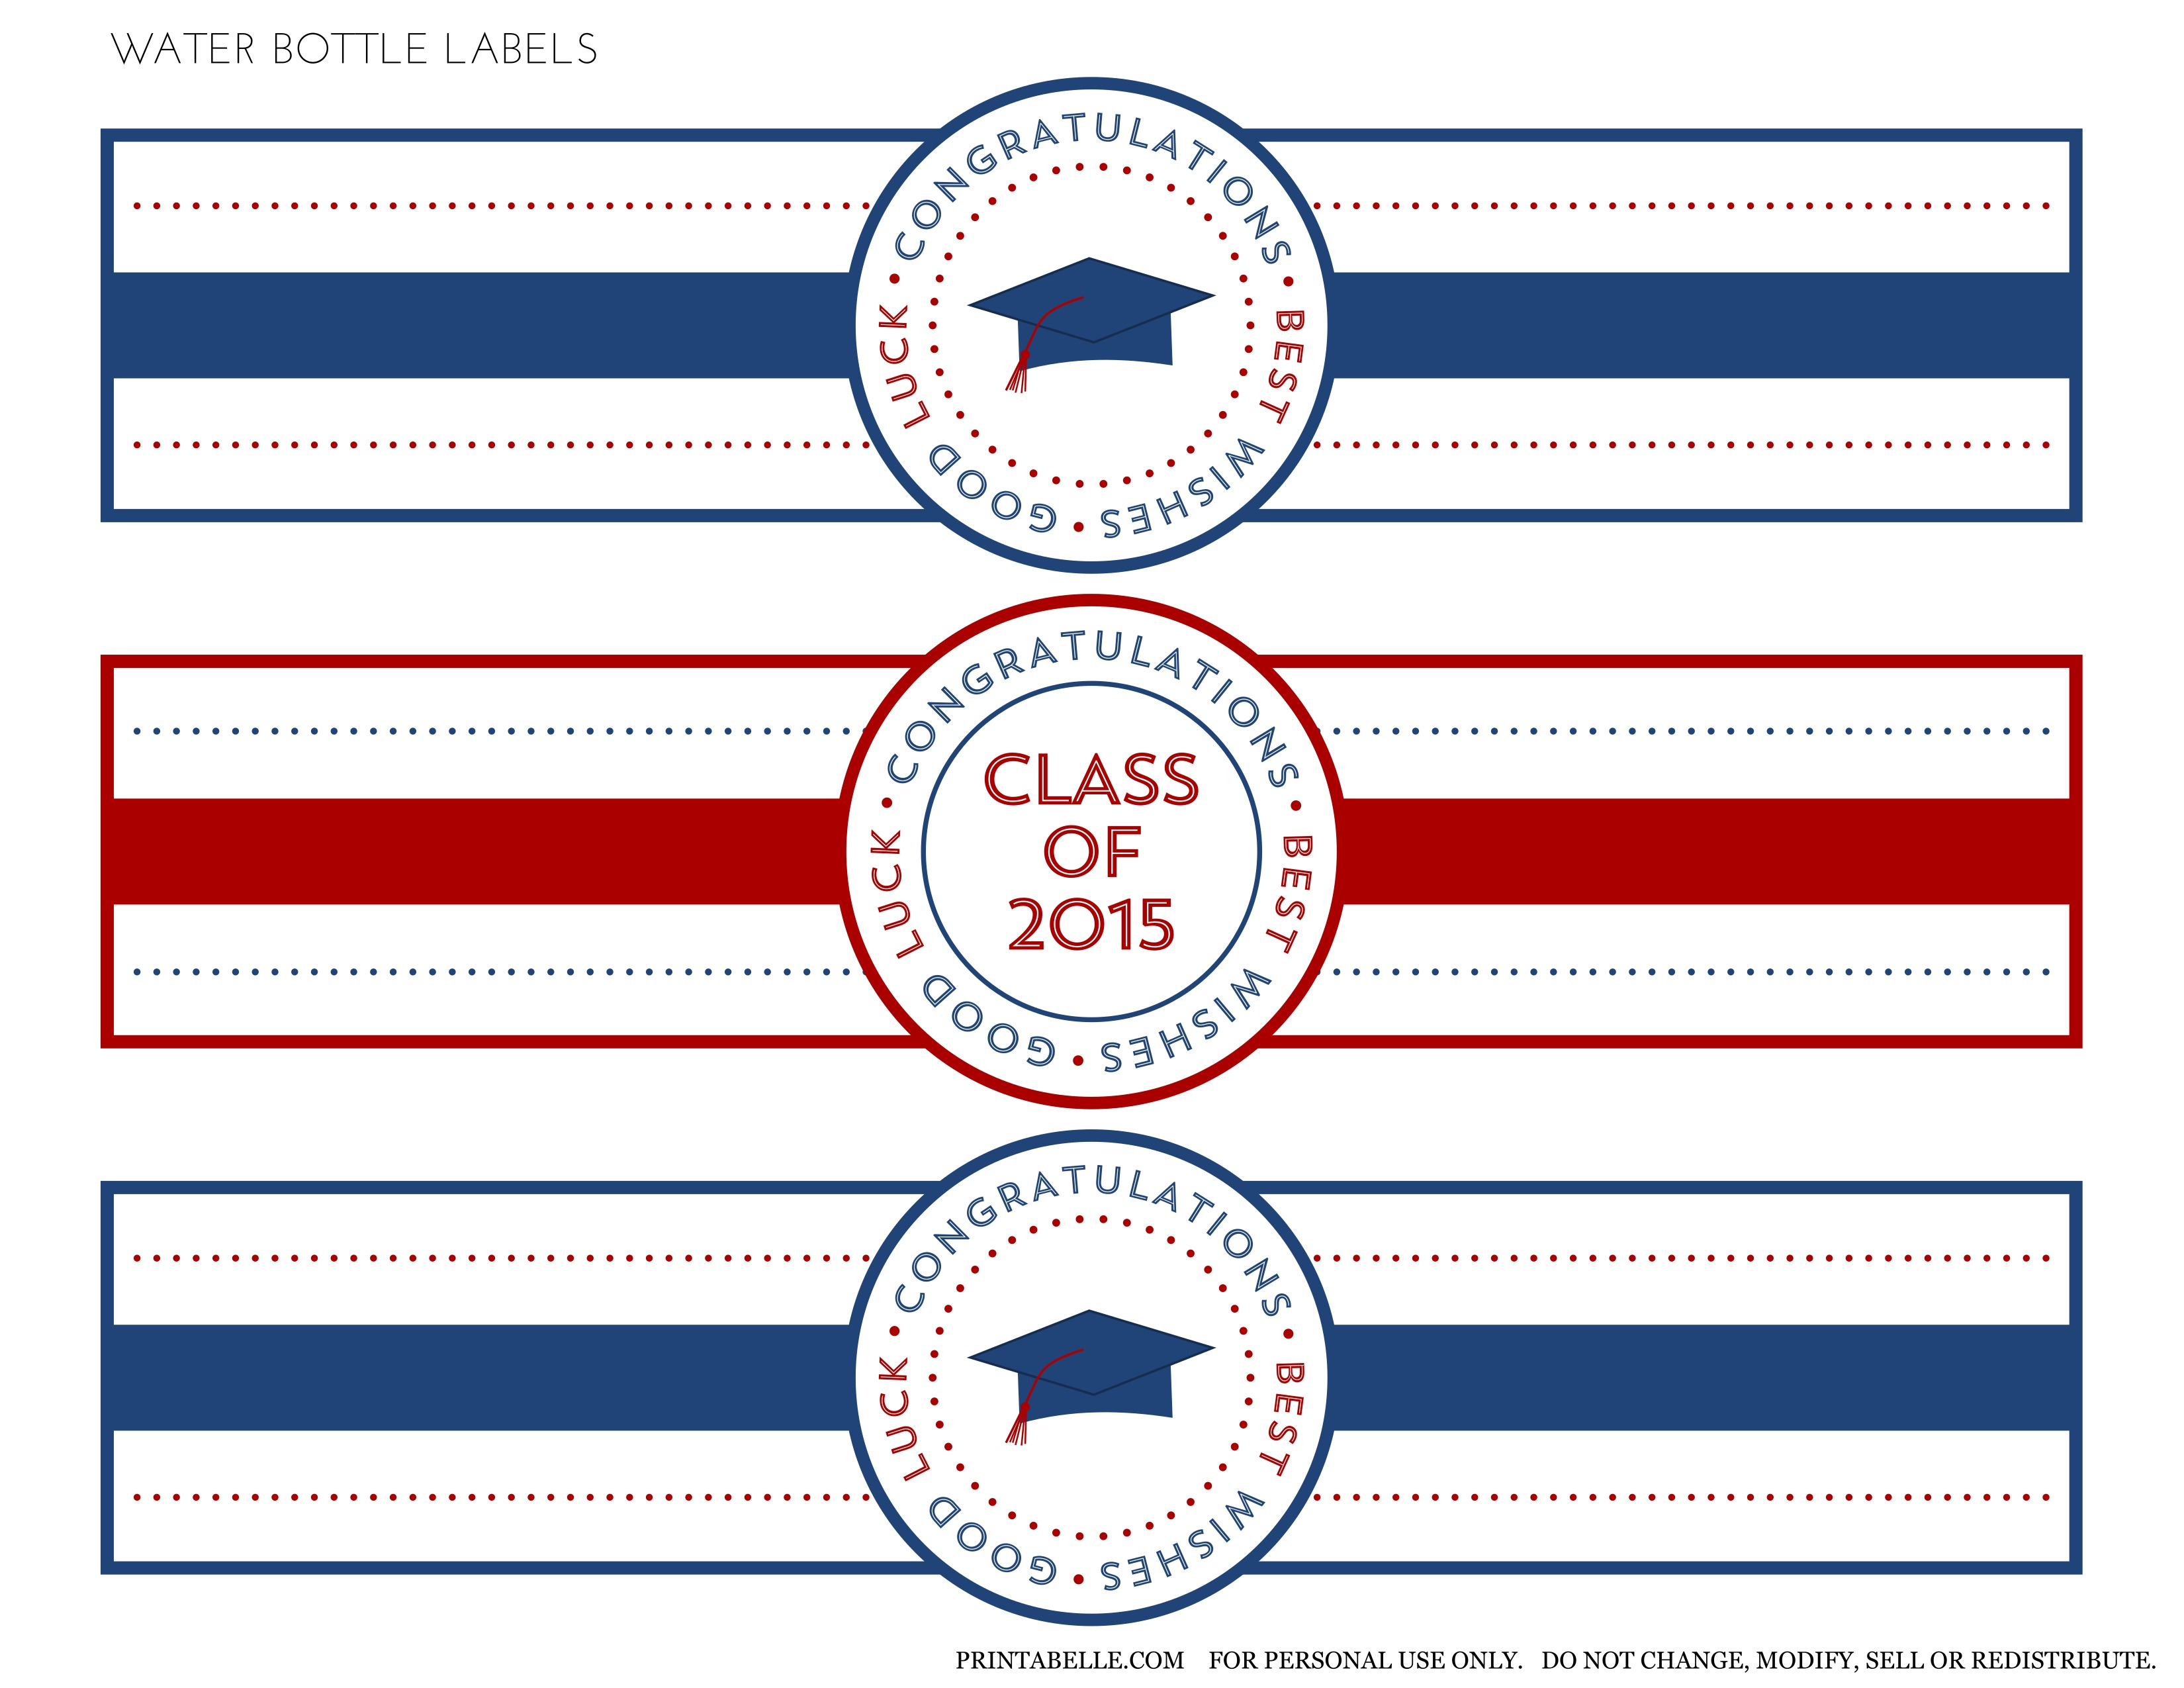 Free 2015 Graduation Printables | Catch My Party - Free Printable Water Bottle Labels Graduation